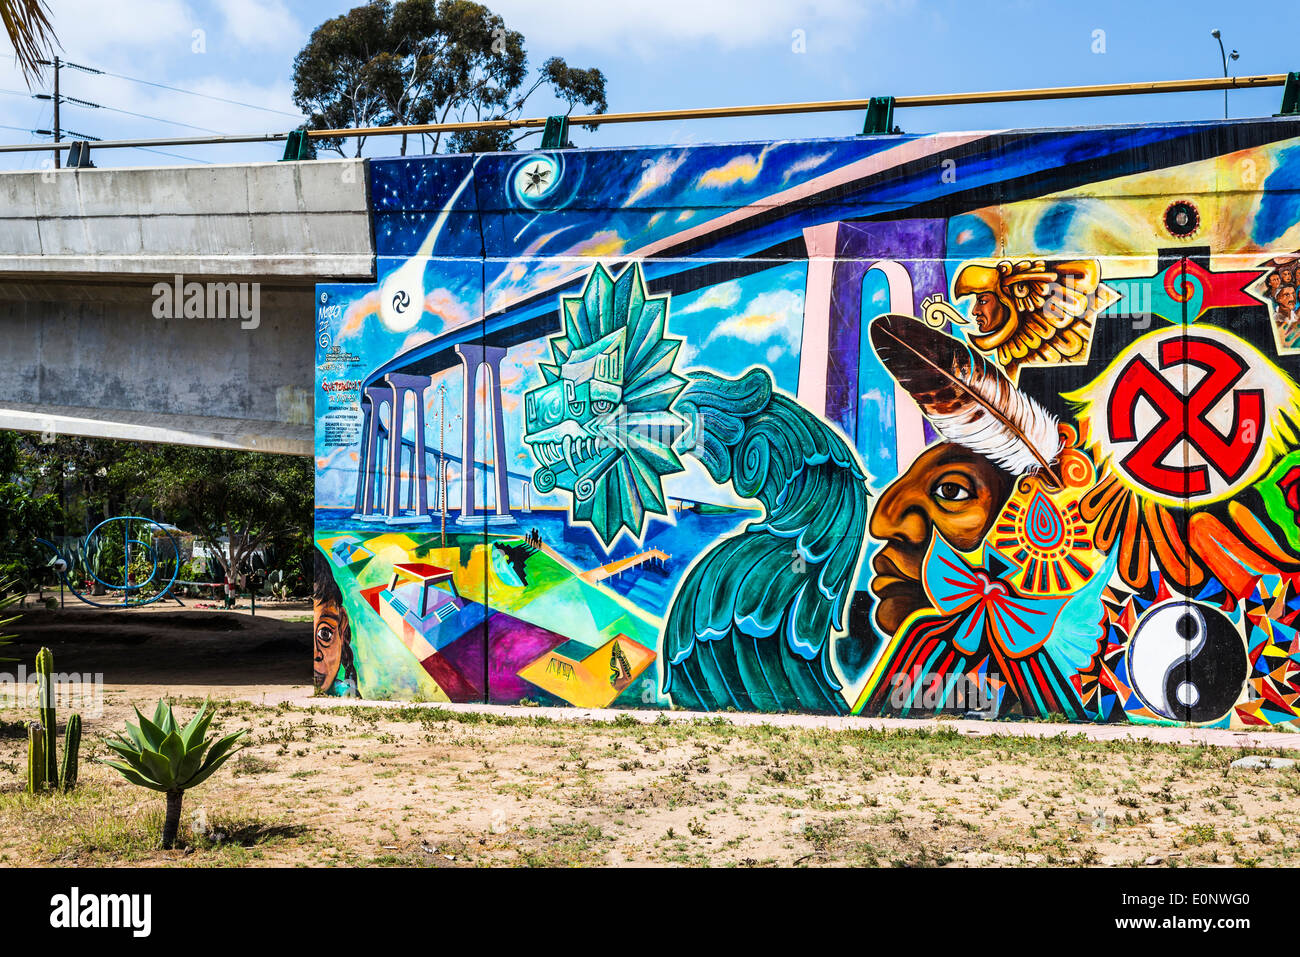 Murals and artwork at Chicano Park. Barrio Logan, San Diego, California, United States. Stock Photo